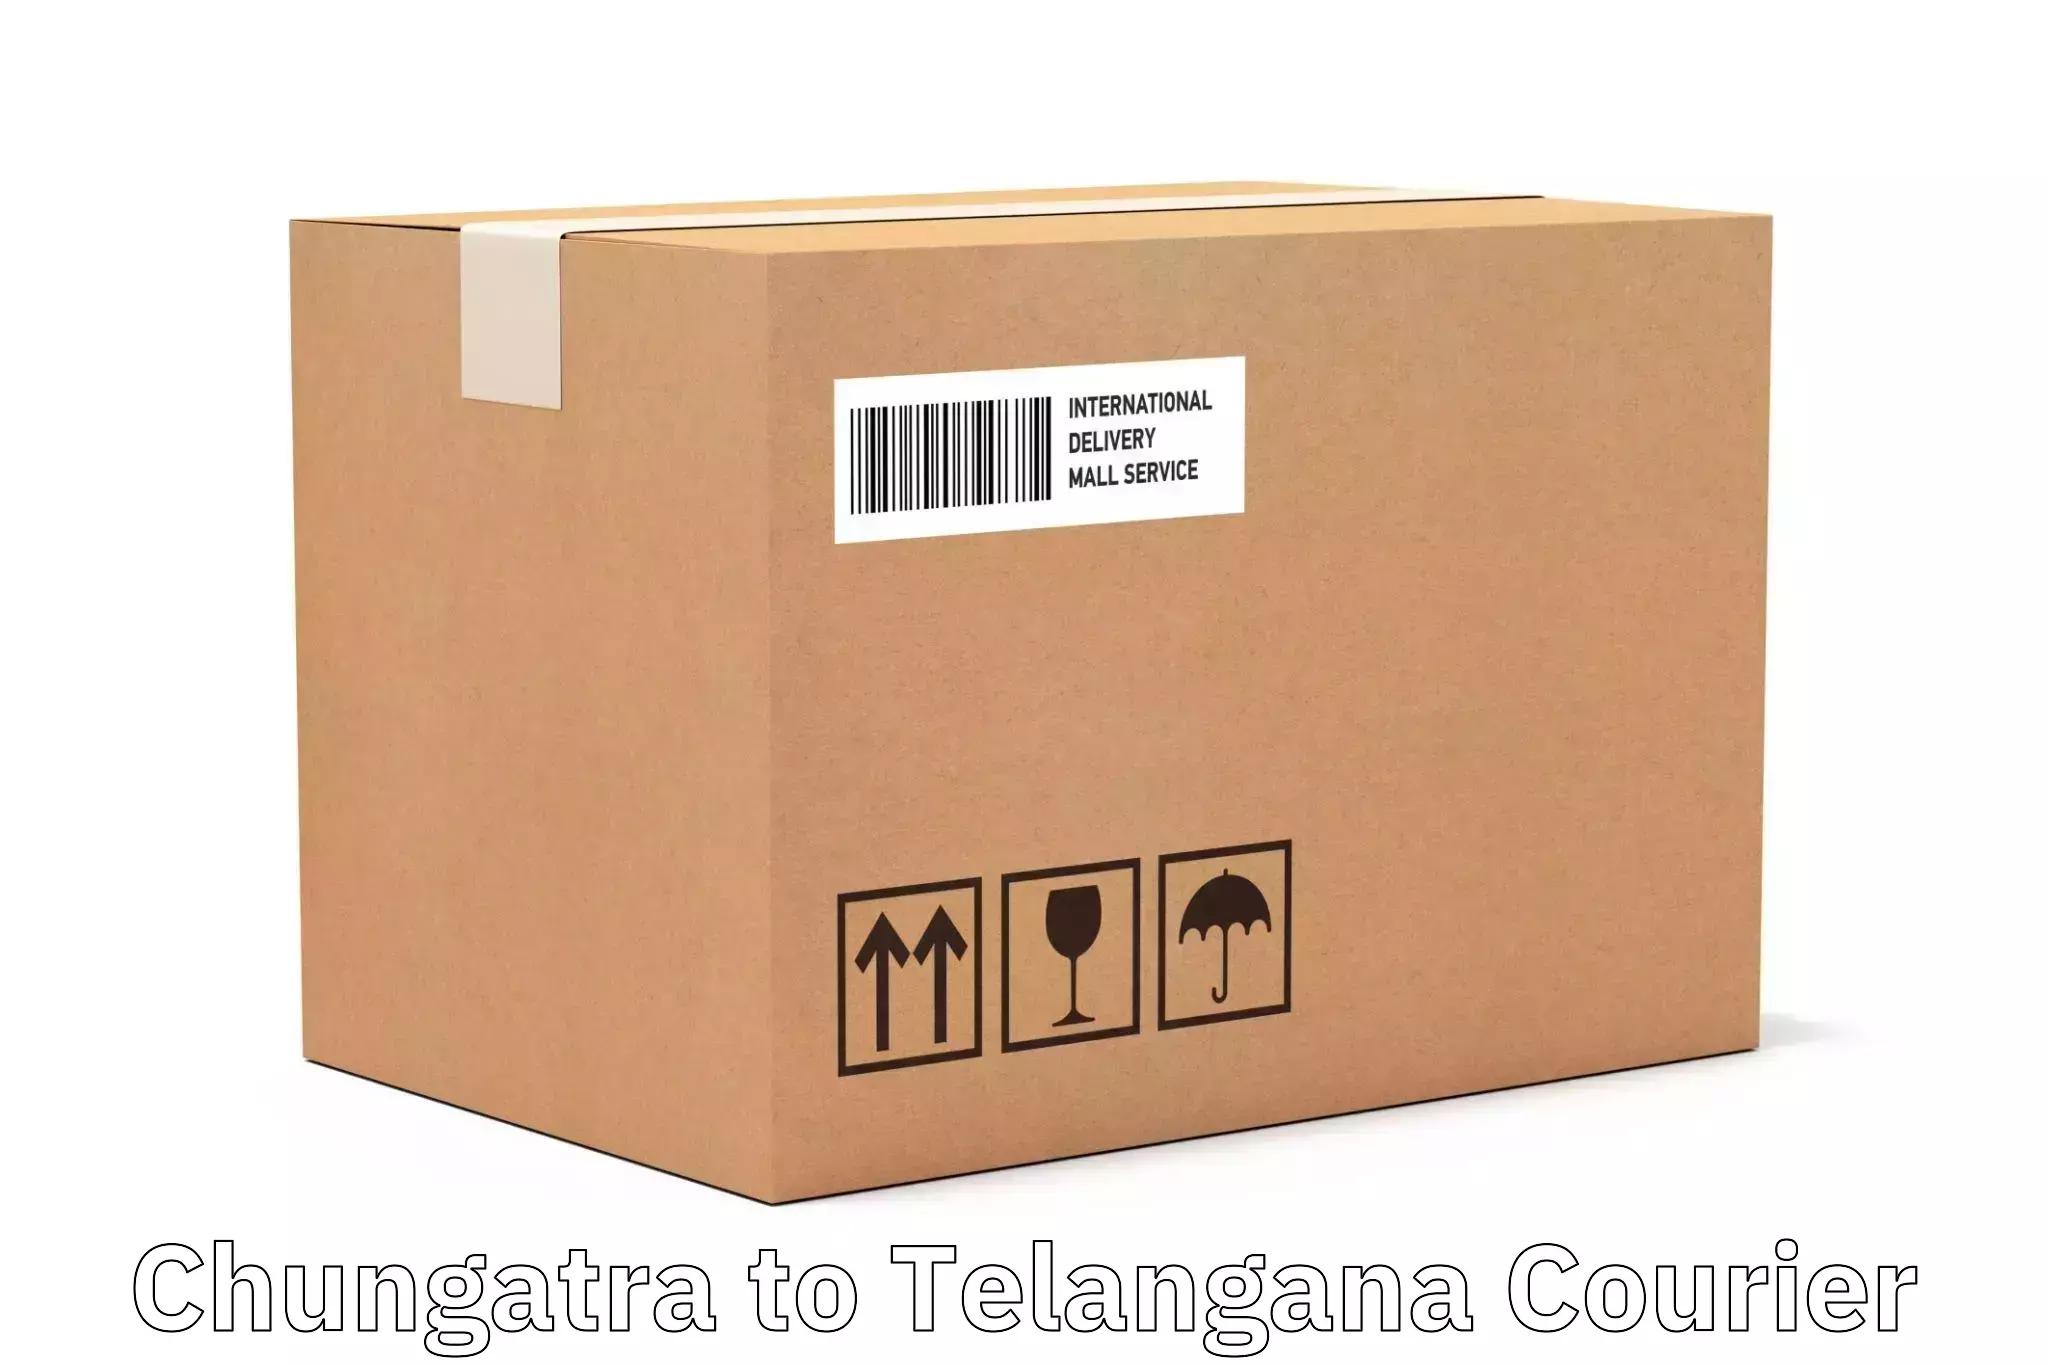 Personal courier services Chungatra to Hyderabad